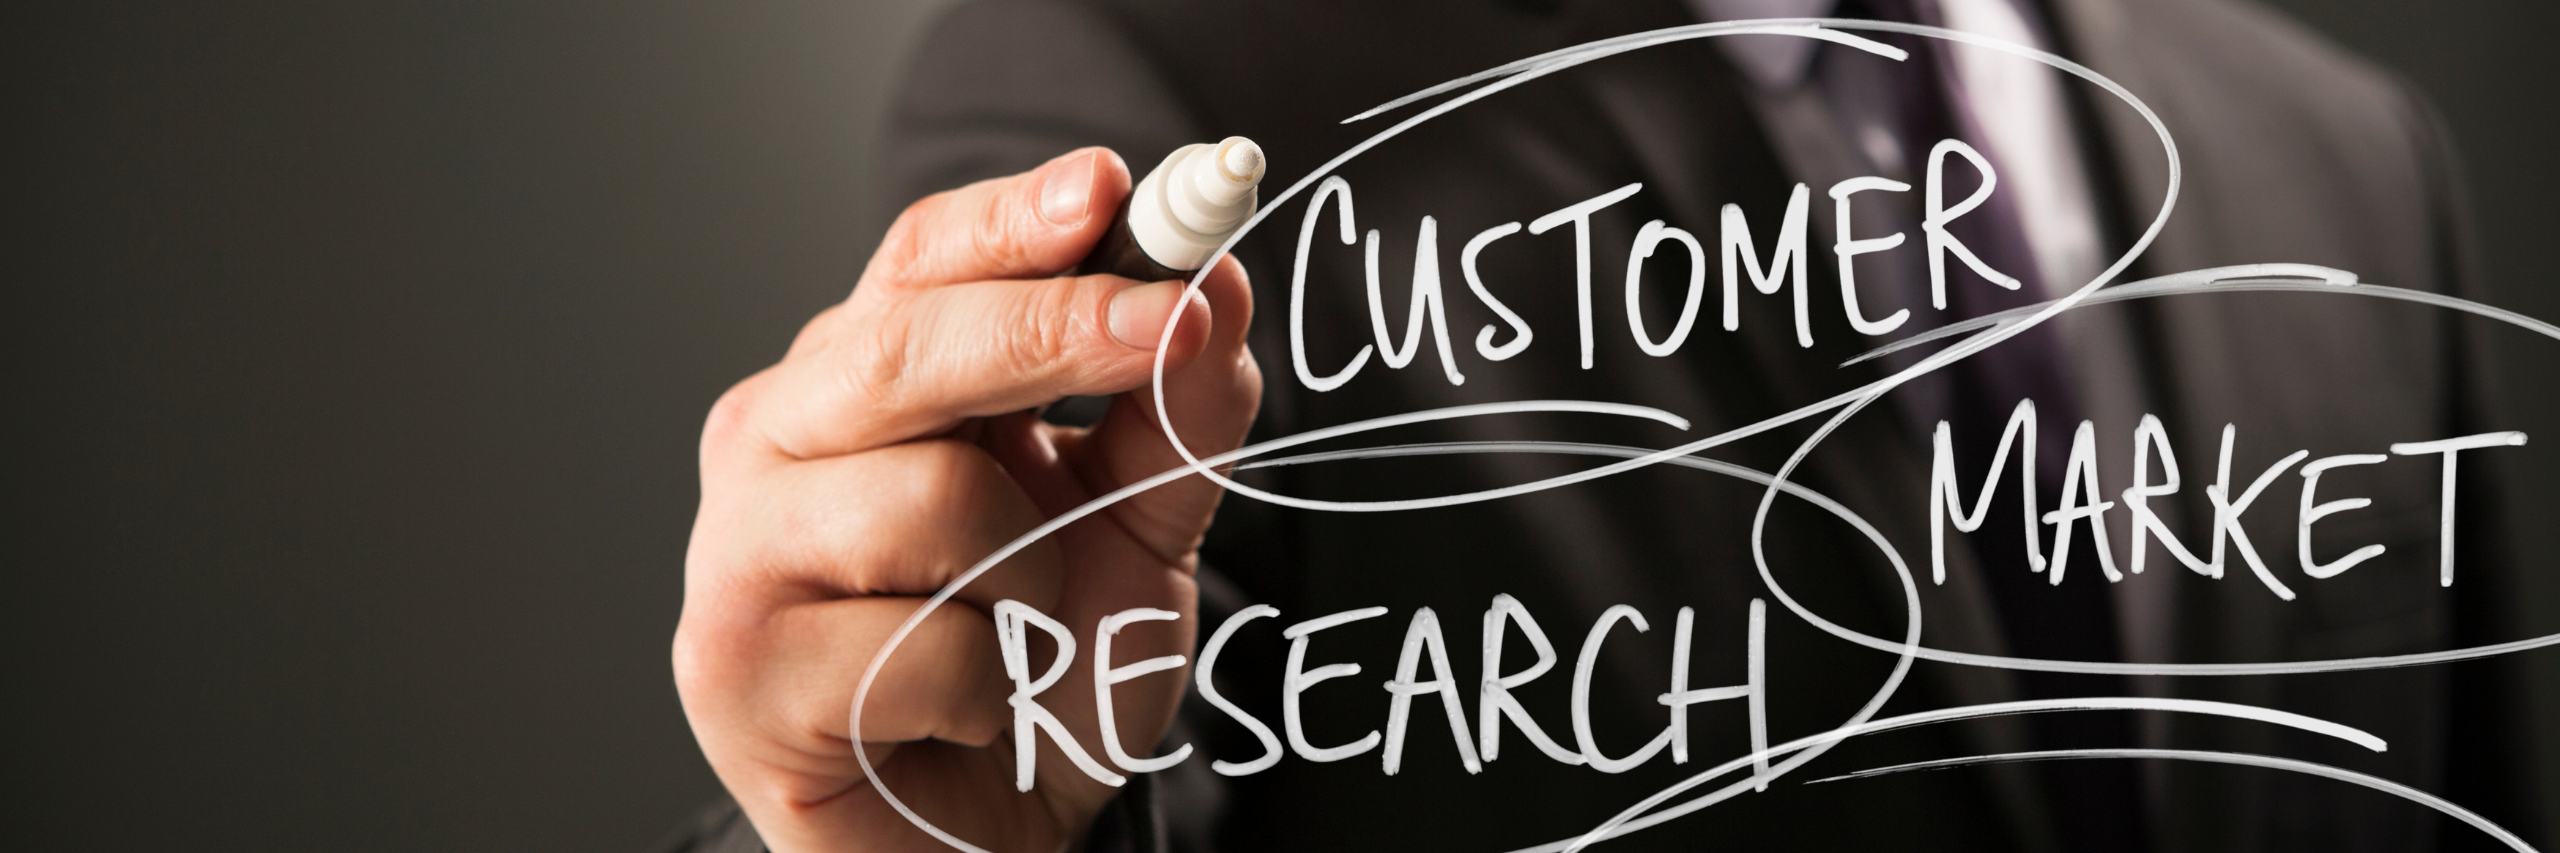 Customer Research Case Study Pearce Marketing agency East Sussex